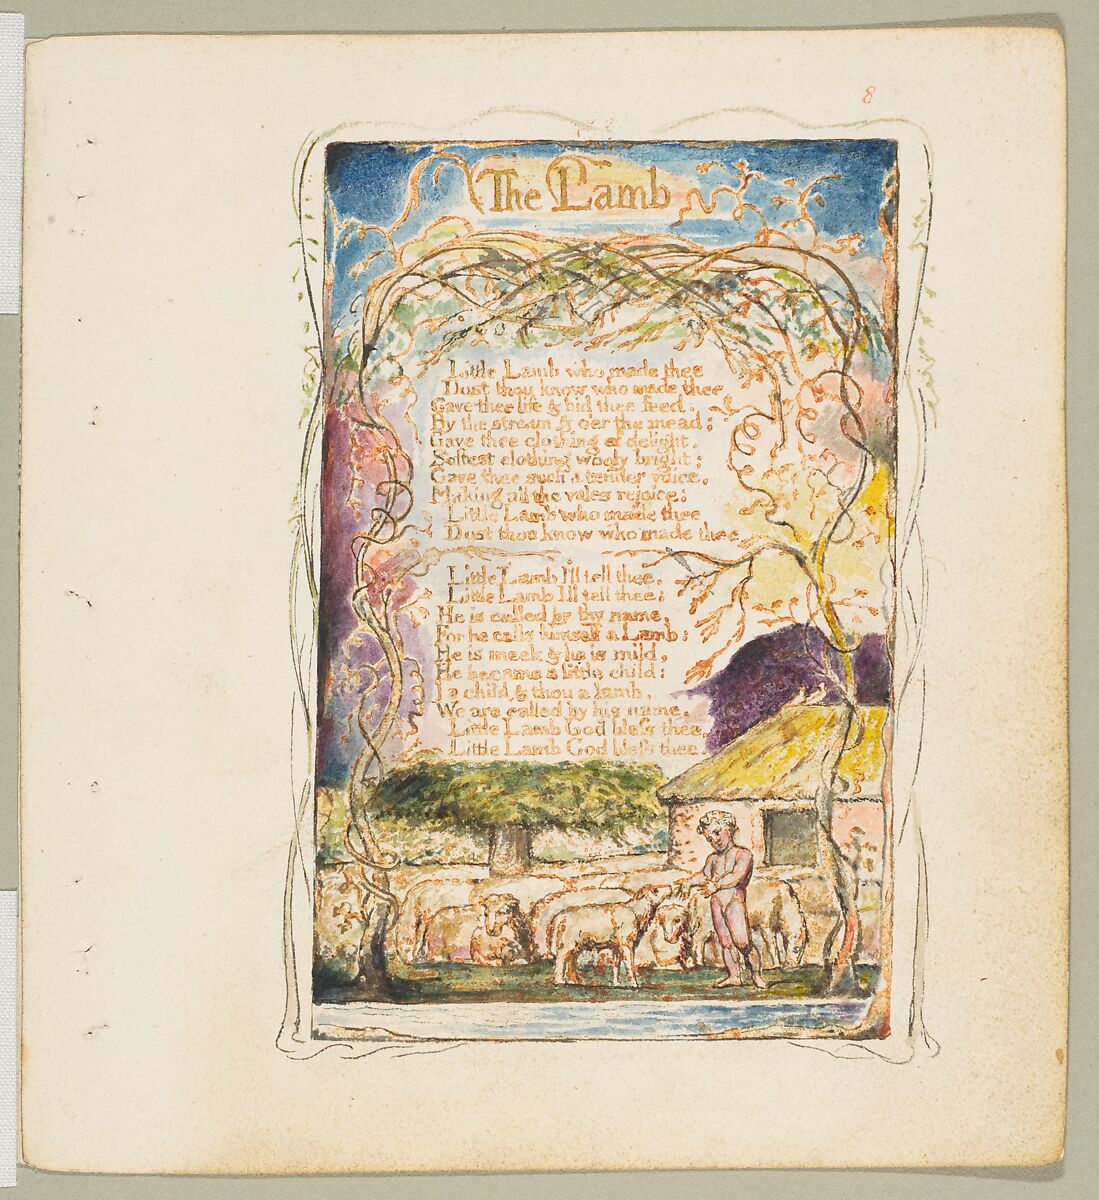 Songs of Innocence: The Lamb, William Blake  British, Relief etching printed in orange-brown ink and hand-colored with watercolor and shell gold